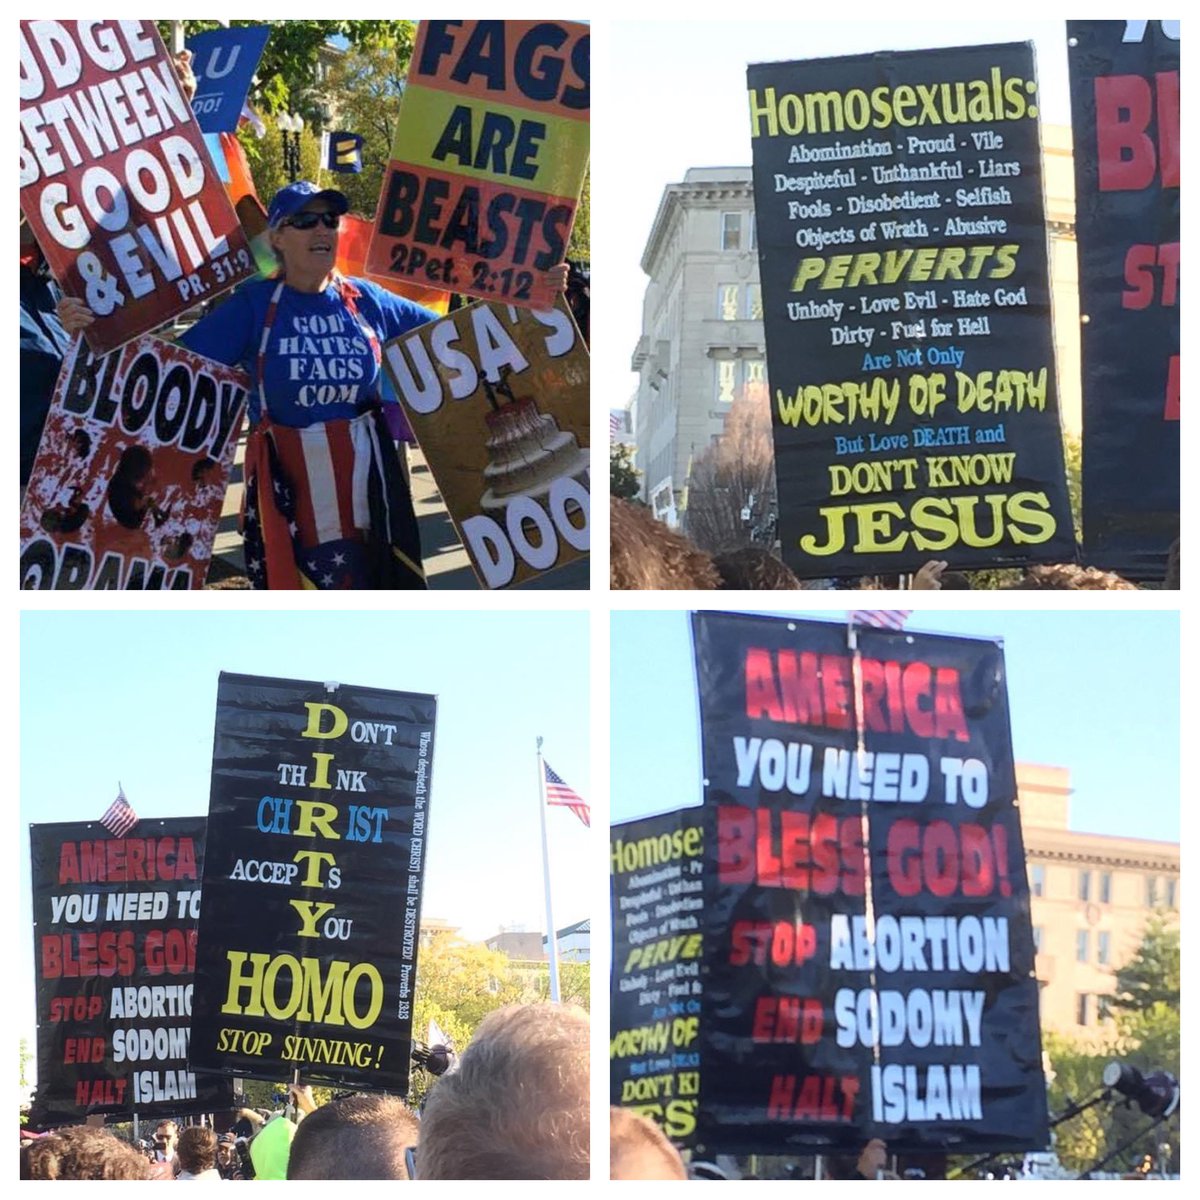 Nine years ago today, I was at the U.S. Supreme Court for the Marriage Equality arguments. These are a few of the pics that I took of anti-LGB protesters before I went into the court, including Shirley Phelps from Westboro. I experienced almost 30 years of violent & extreme…